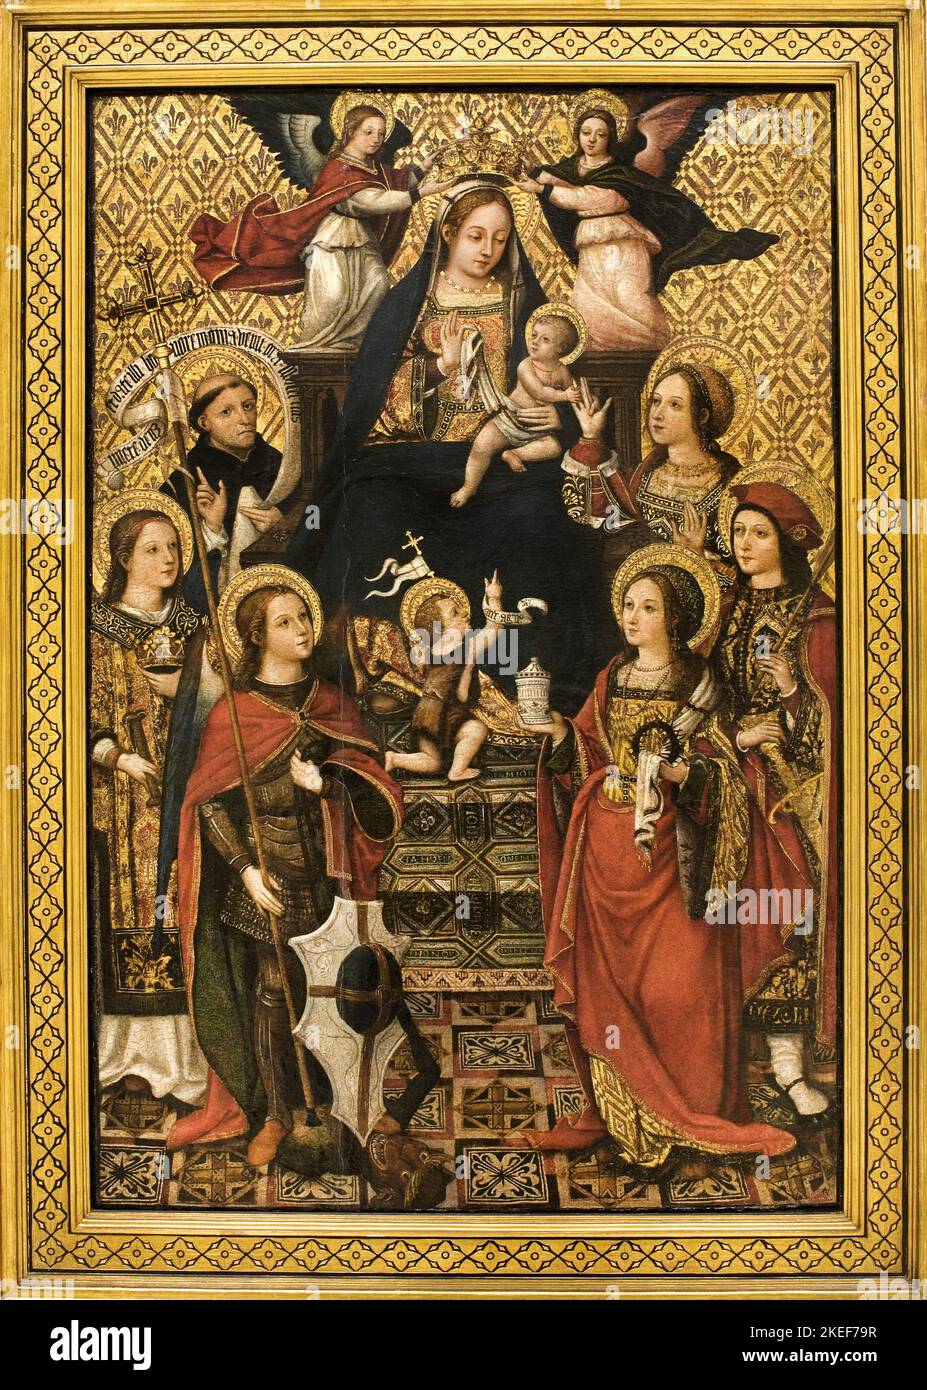 Vicente Masip, Virgin and Child, Saints and Angels, 16th Century, Tempera and Gold Leaf on Wood; Museu Nacional d'Art de Catalunya, Barcelona, Spain. Stock Photo